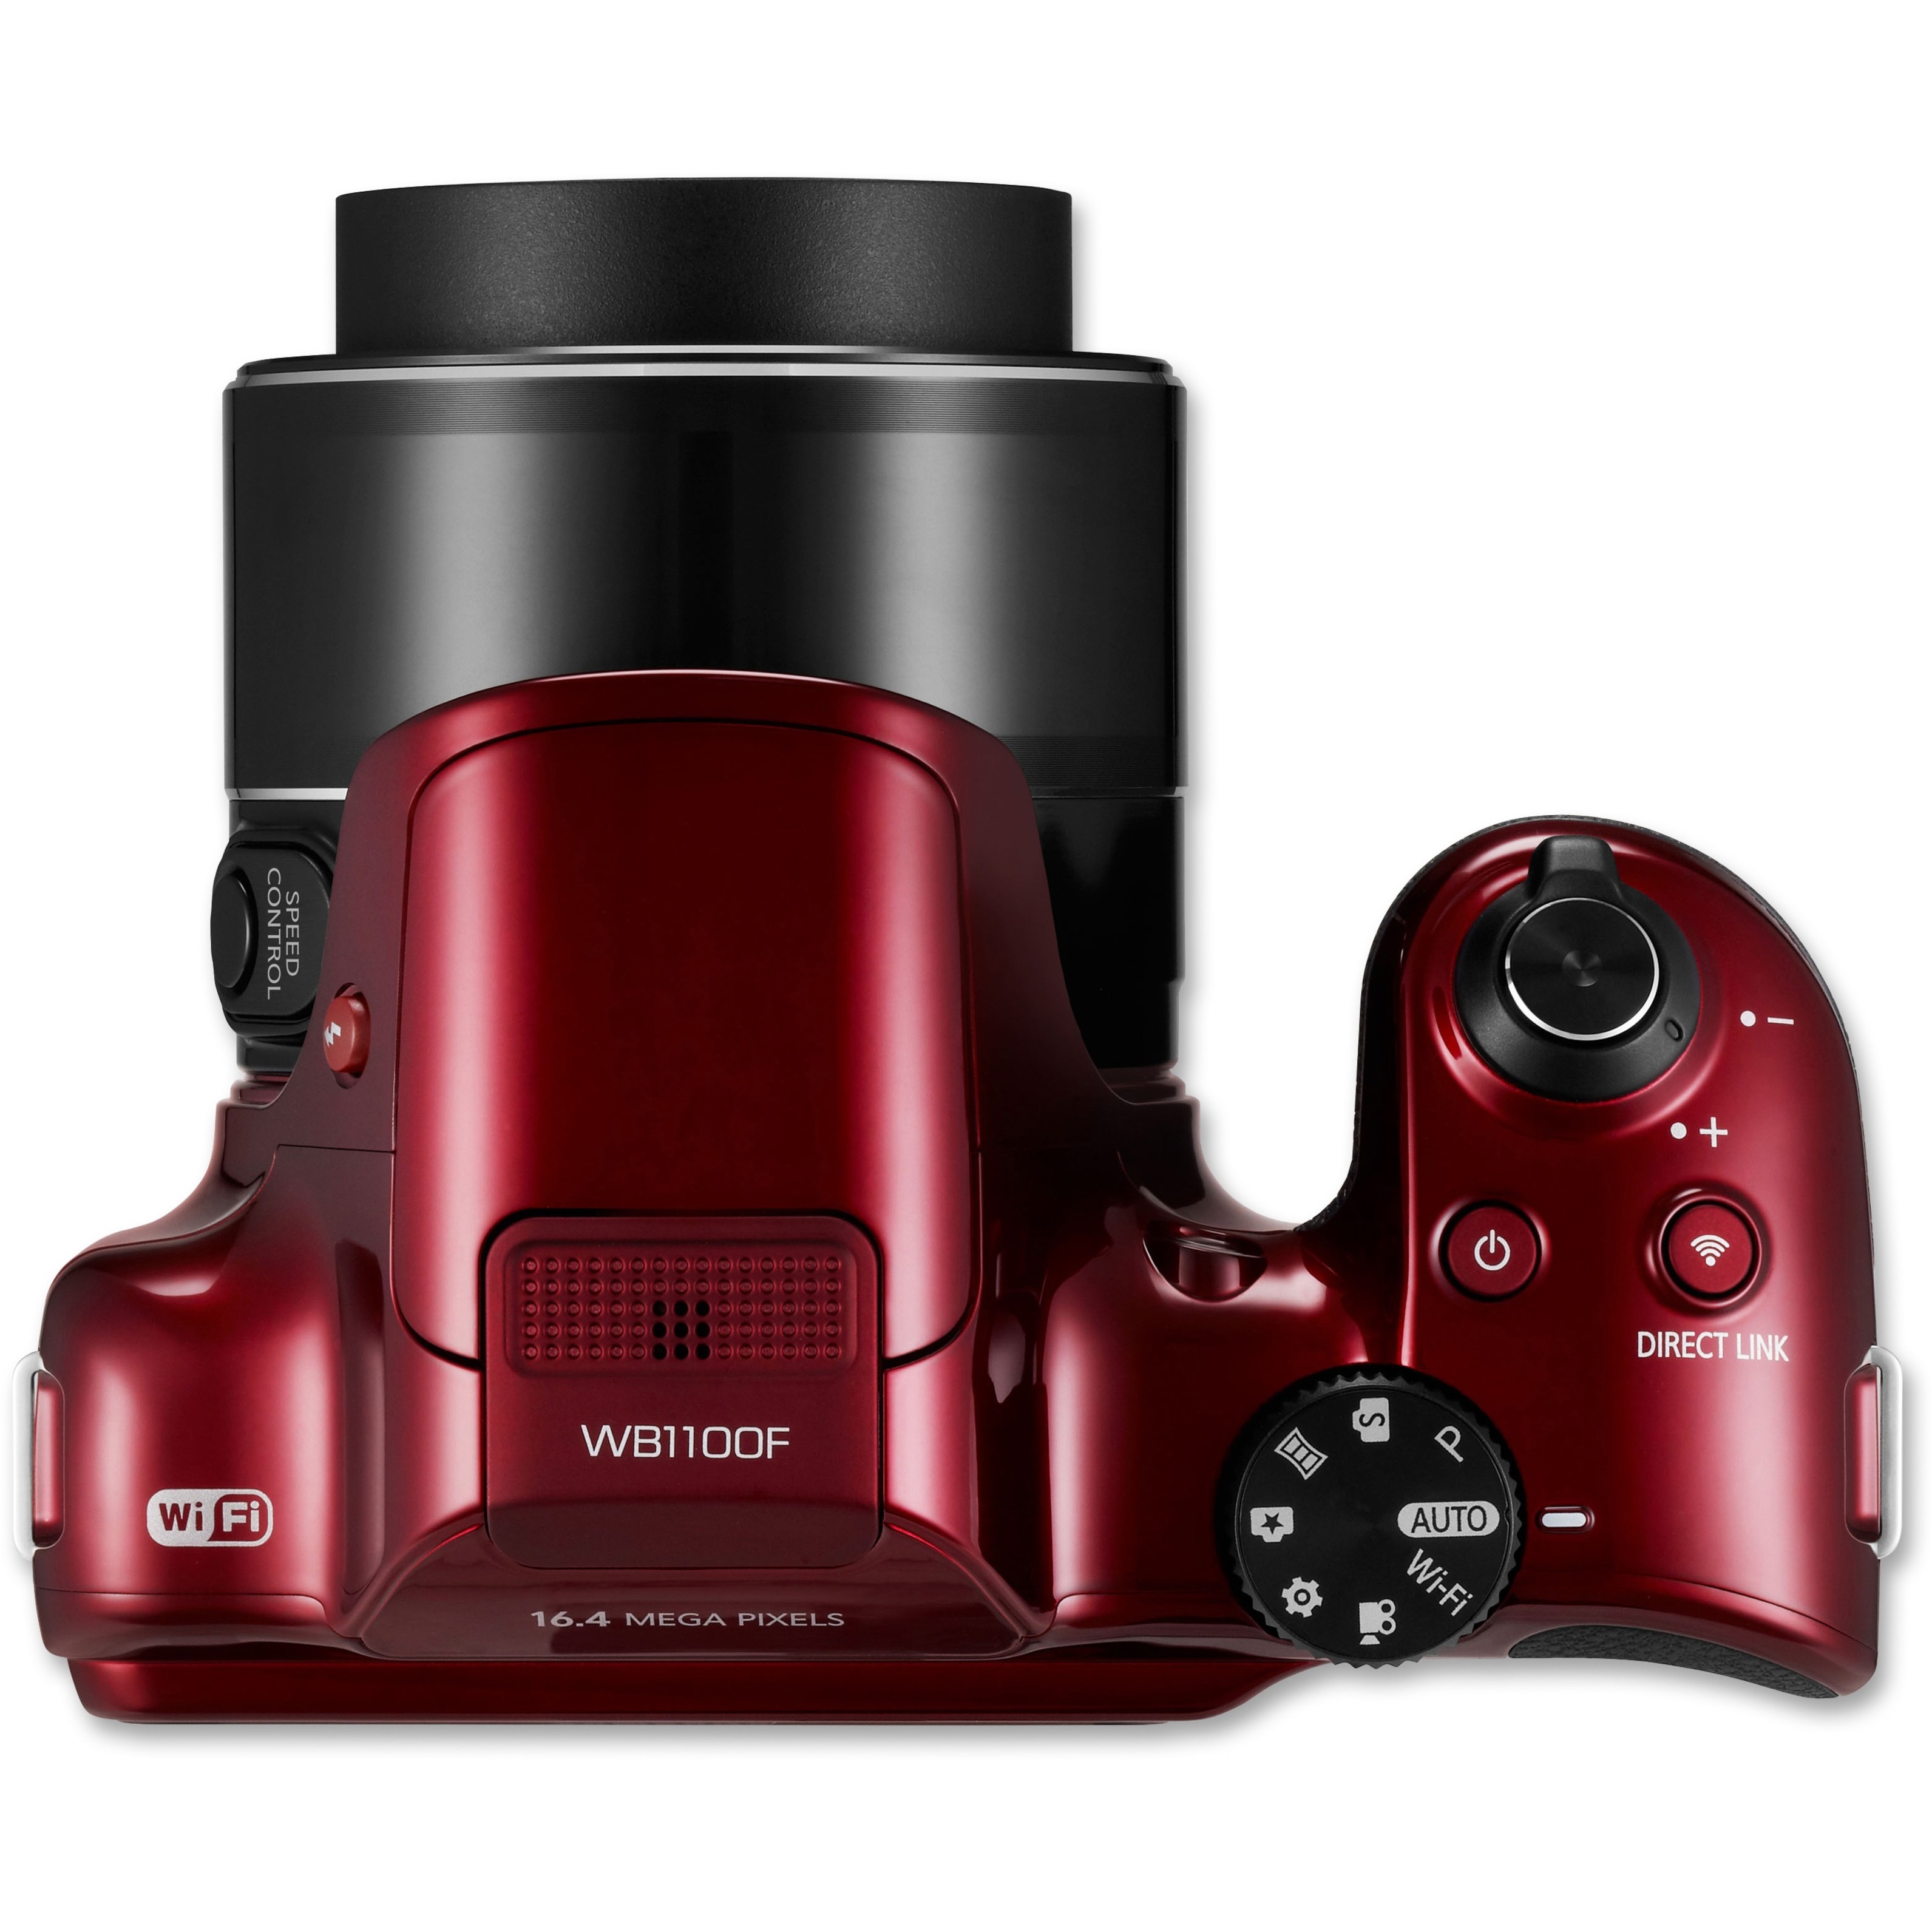 Samsung WB1100F 16.2 Megapixel Compact Camera, Red - image 5 of 5